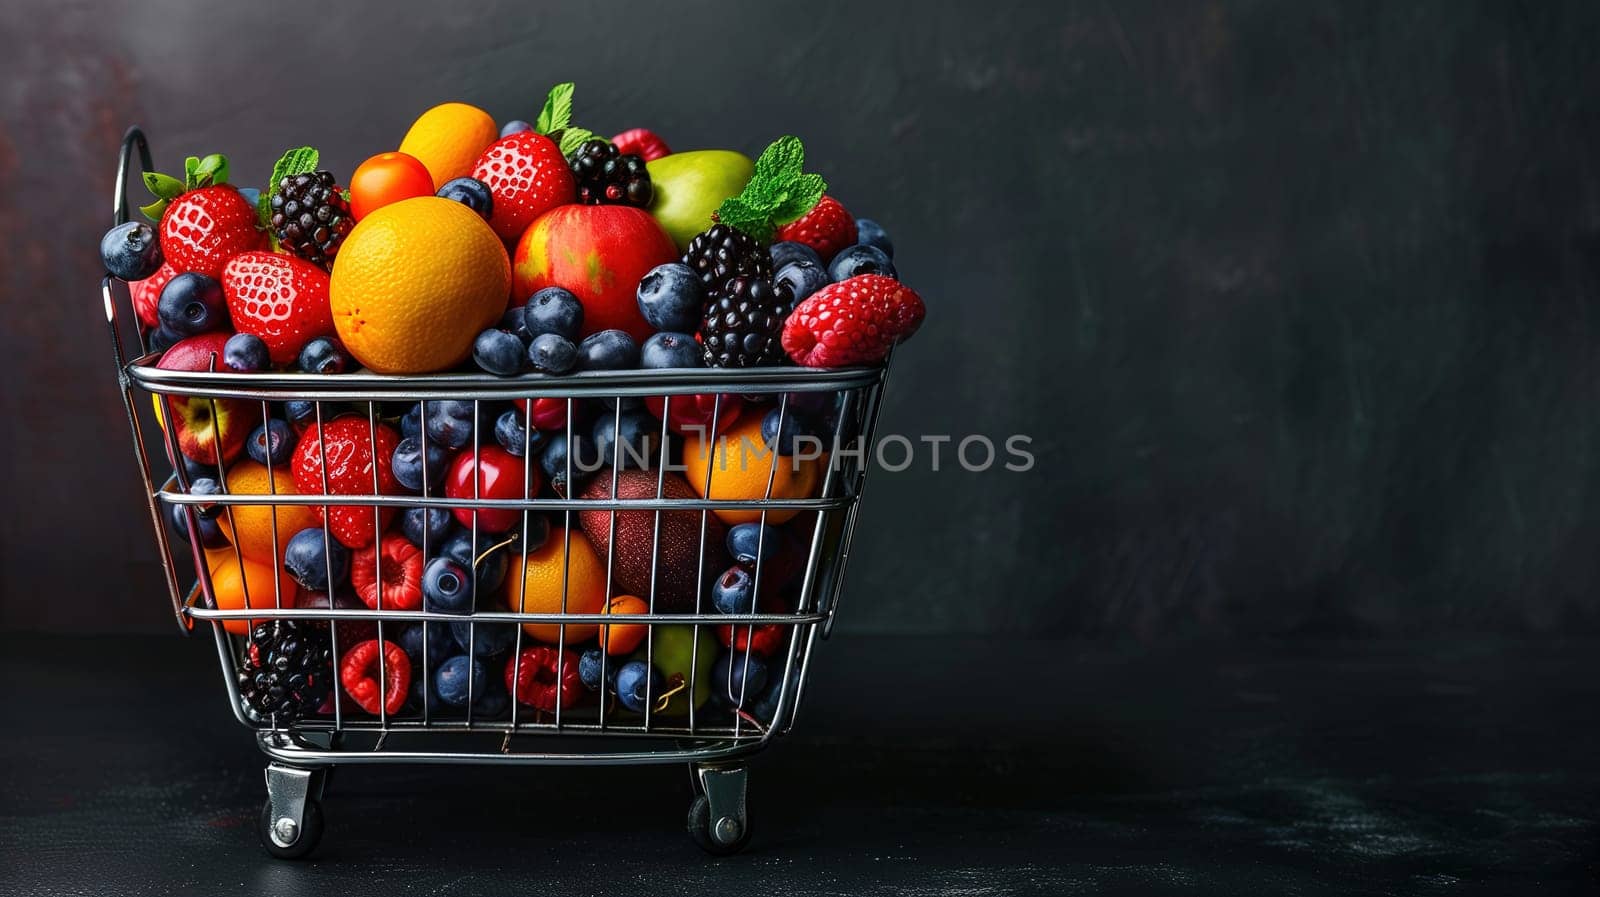 A metal basket is filled to the brim with a variety of colorful and delicious fruits. Oranges, apples, bananas, grapes, berries, and more create a vibrant and appetizing display.